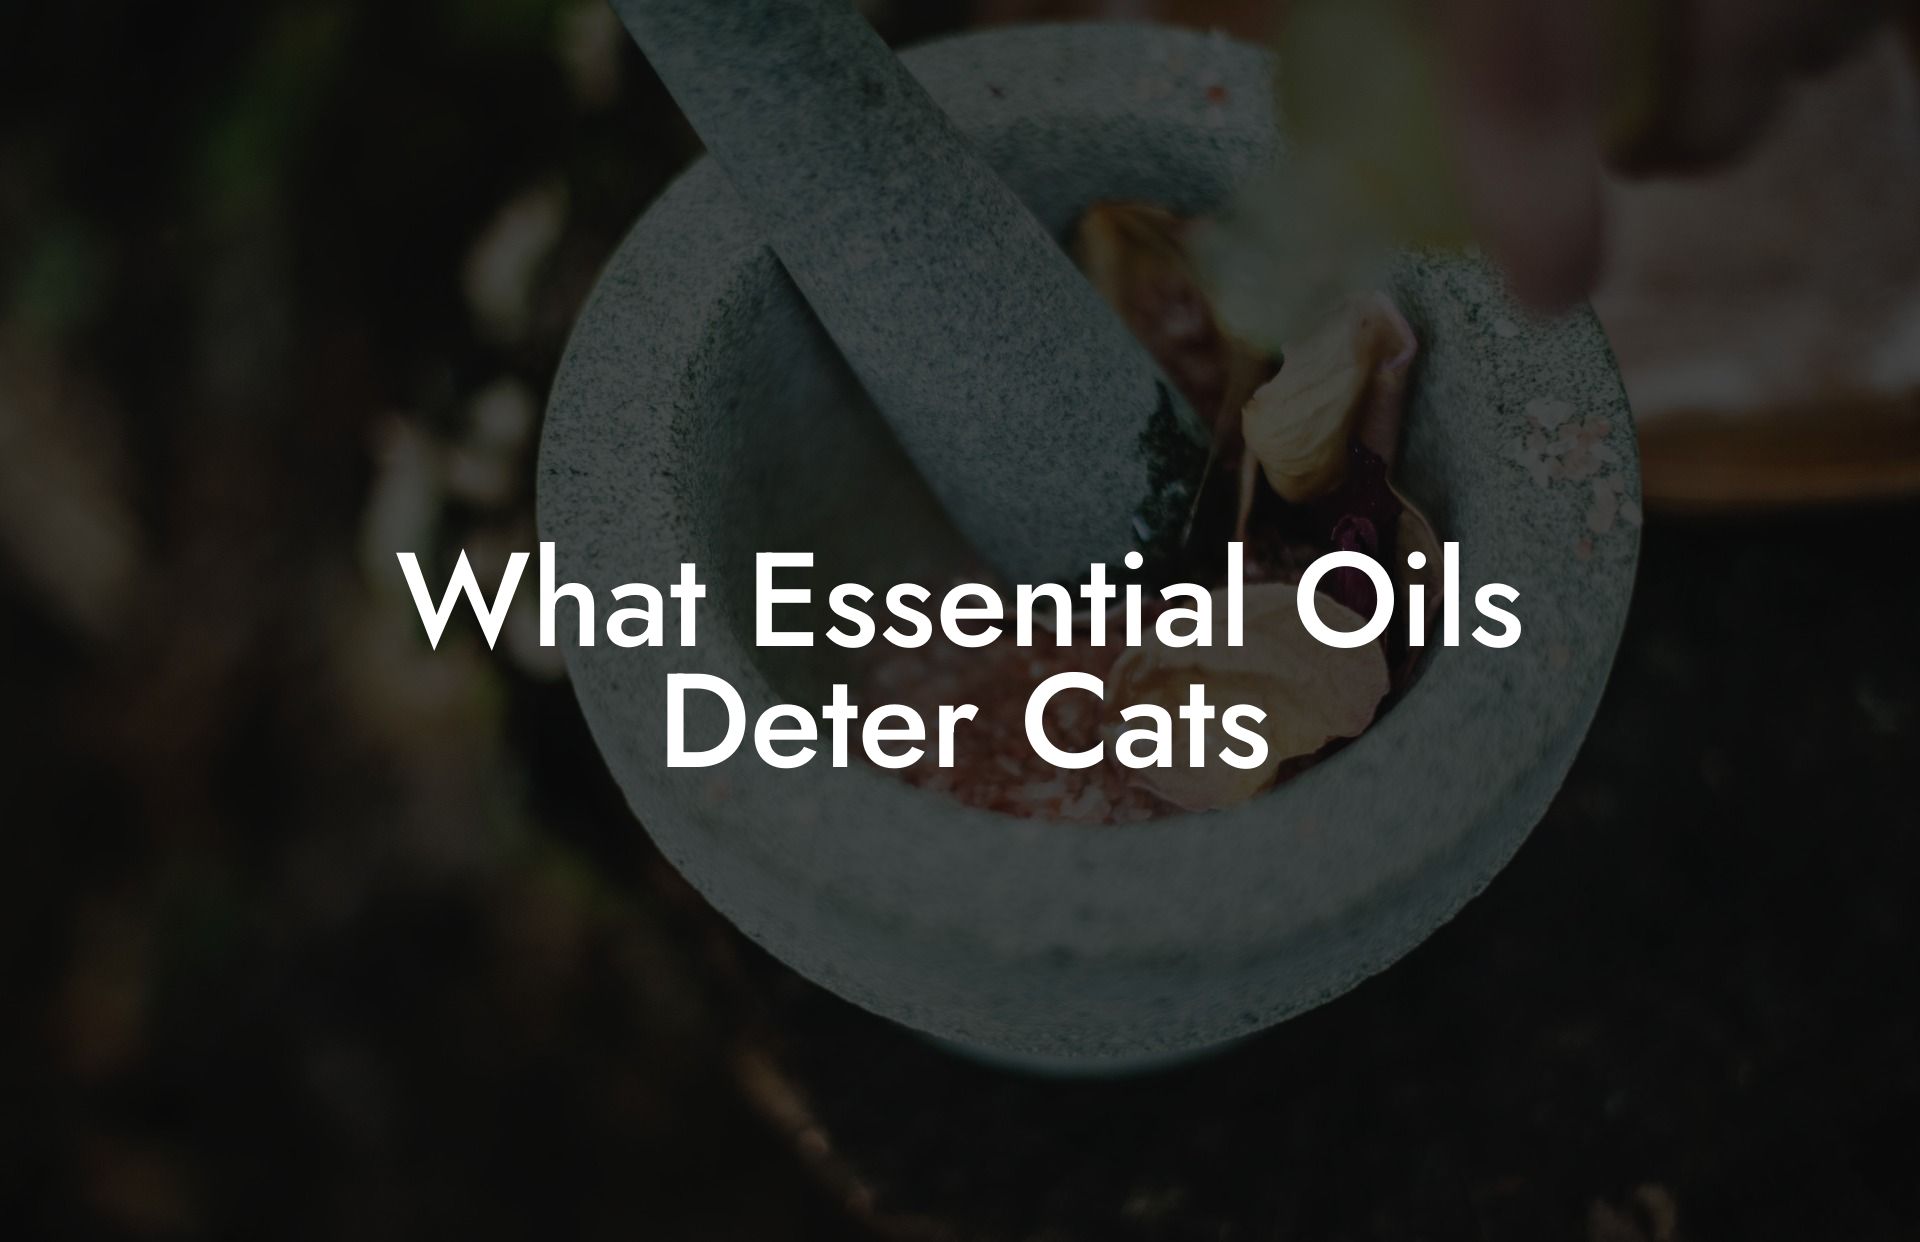 What Essential Oils Deter Cats